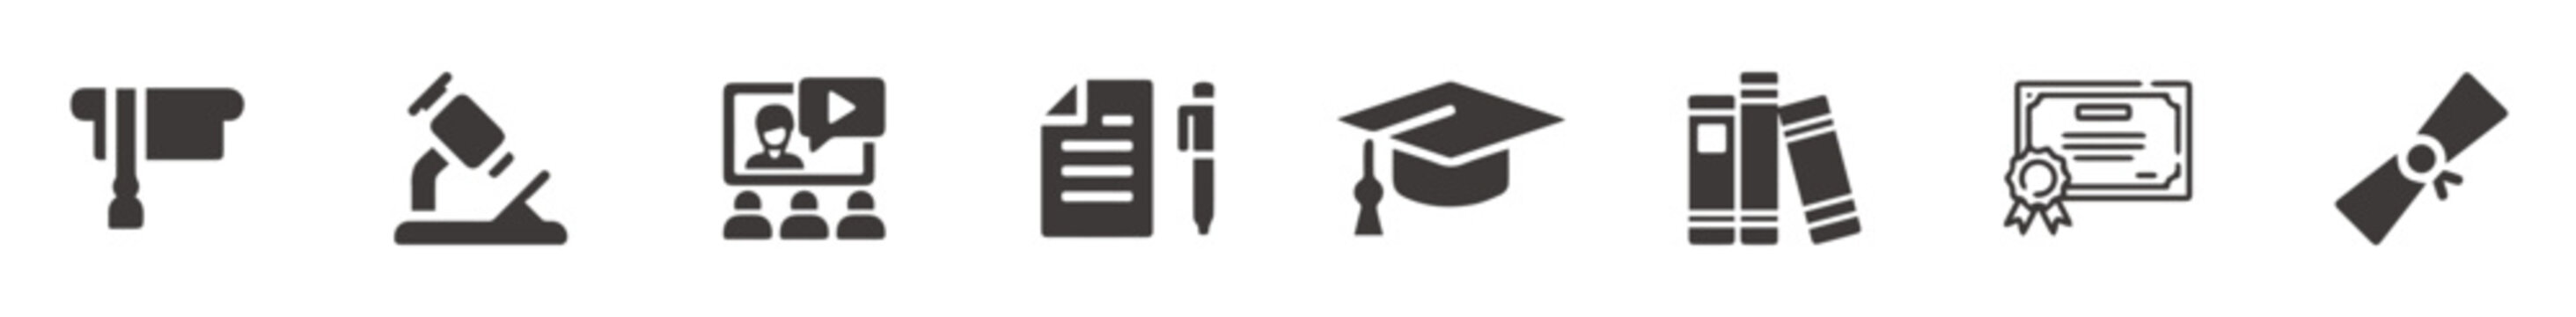 Business college education icons vector. Graduation related flat icons.